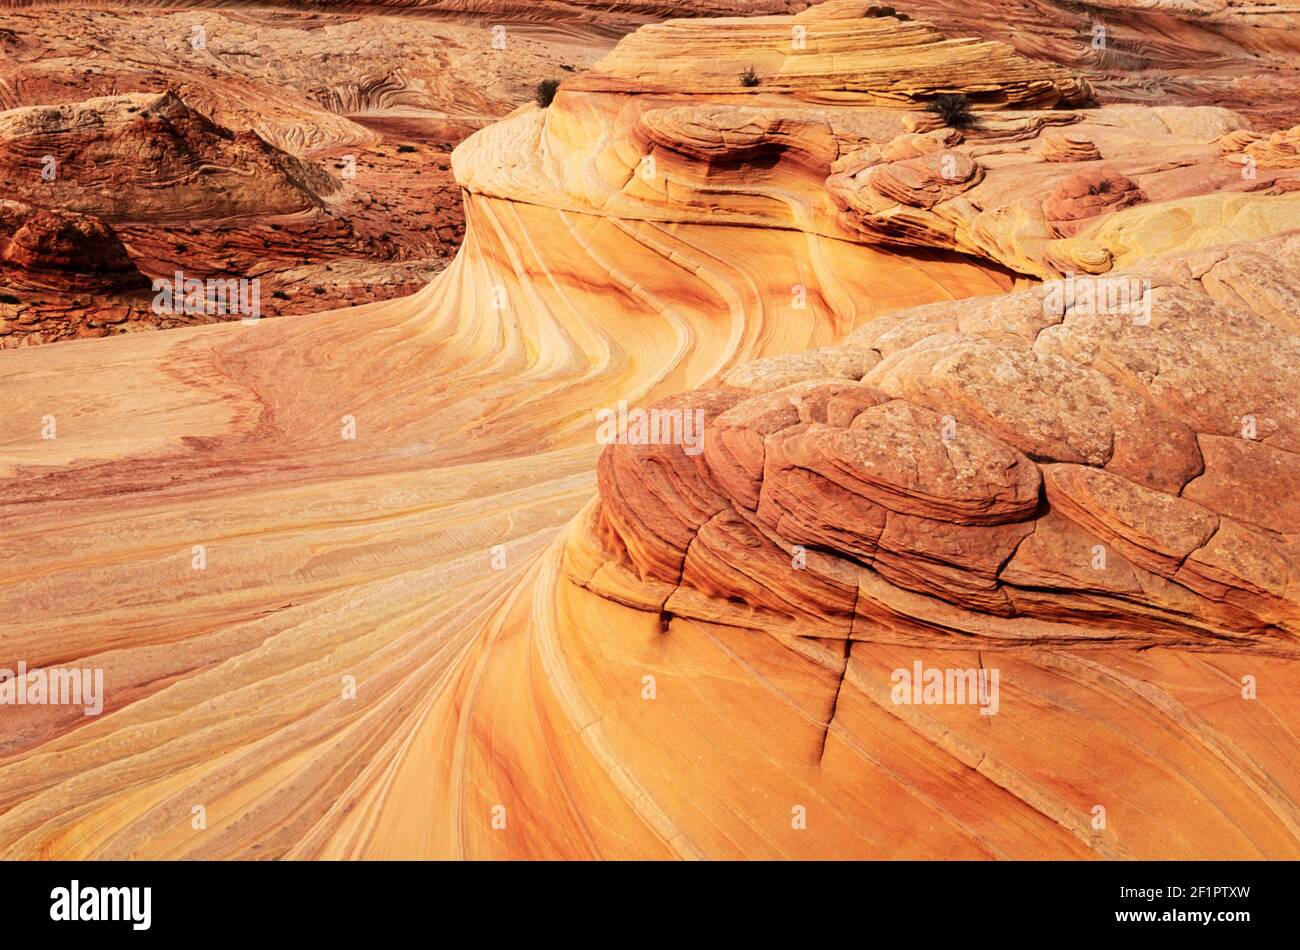 2002 2002 Arizona The Wave - The second wave Swirls and patterns of sandstone fins in coyote buttes north known as the second wave vermillion cliffs wilderness Arizona utah usa. The formation is situated on the slopes of the Coyote Buttes in the Paria Canyon-Vermilion Cliffs Wilderness of the Colorado Plateau. The area is administered by the Bureau of Land Management (BLM) at the Grand Staircase-Escalante National Monument visitor center in Kanab, Utah. The soft sandstone is fragile, especially the ridges and ribbing of the Wave. Arizona, USA ,United States of America Stock Photo